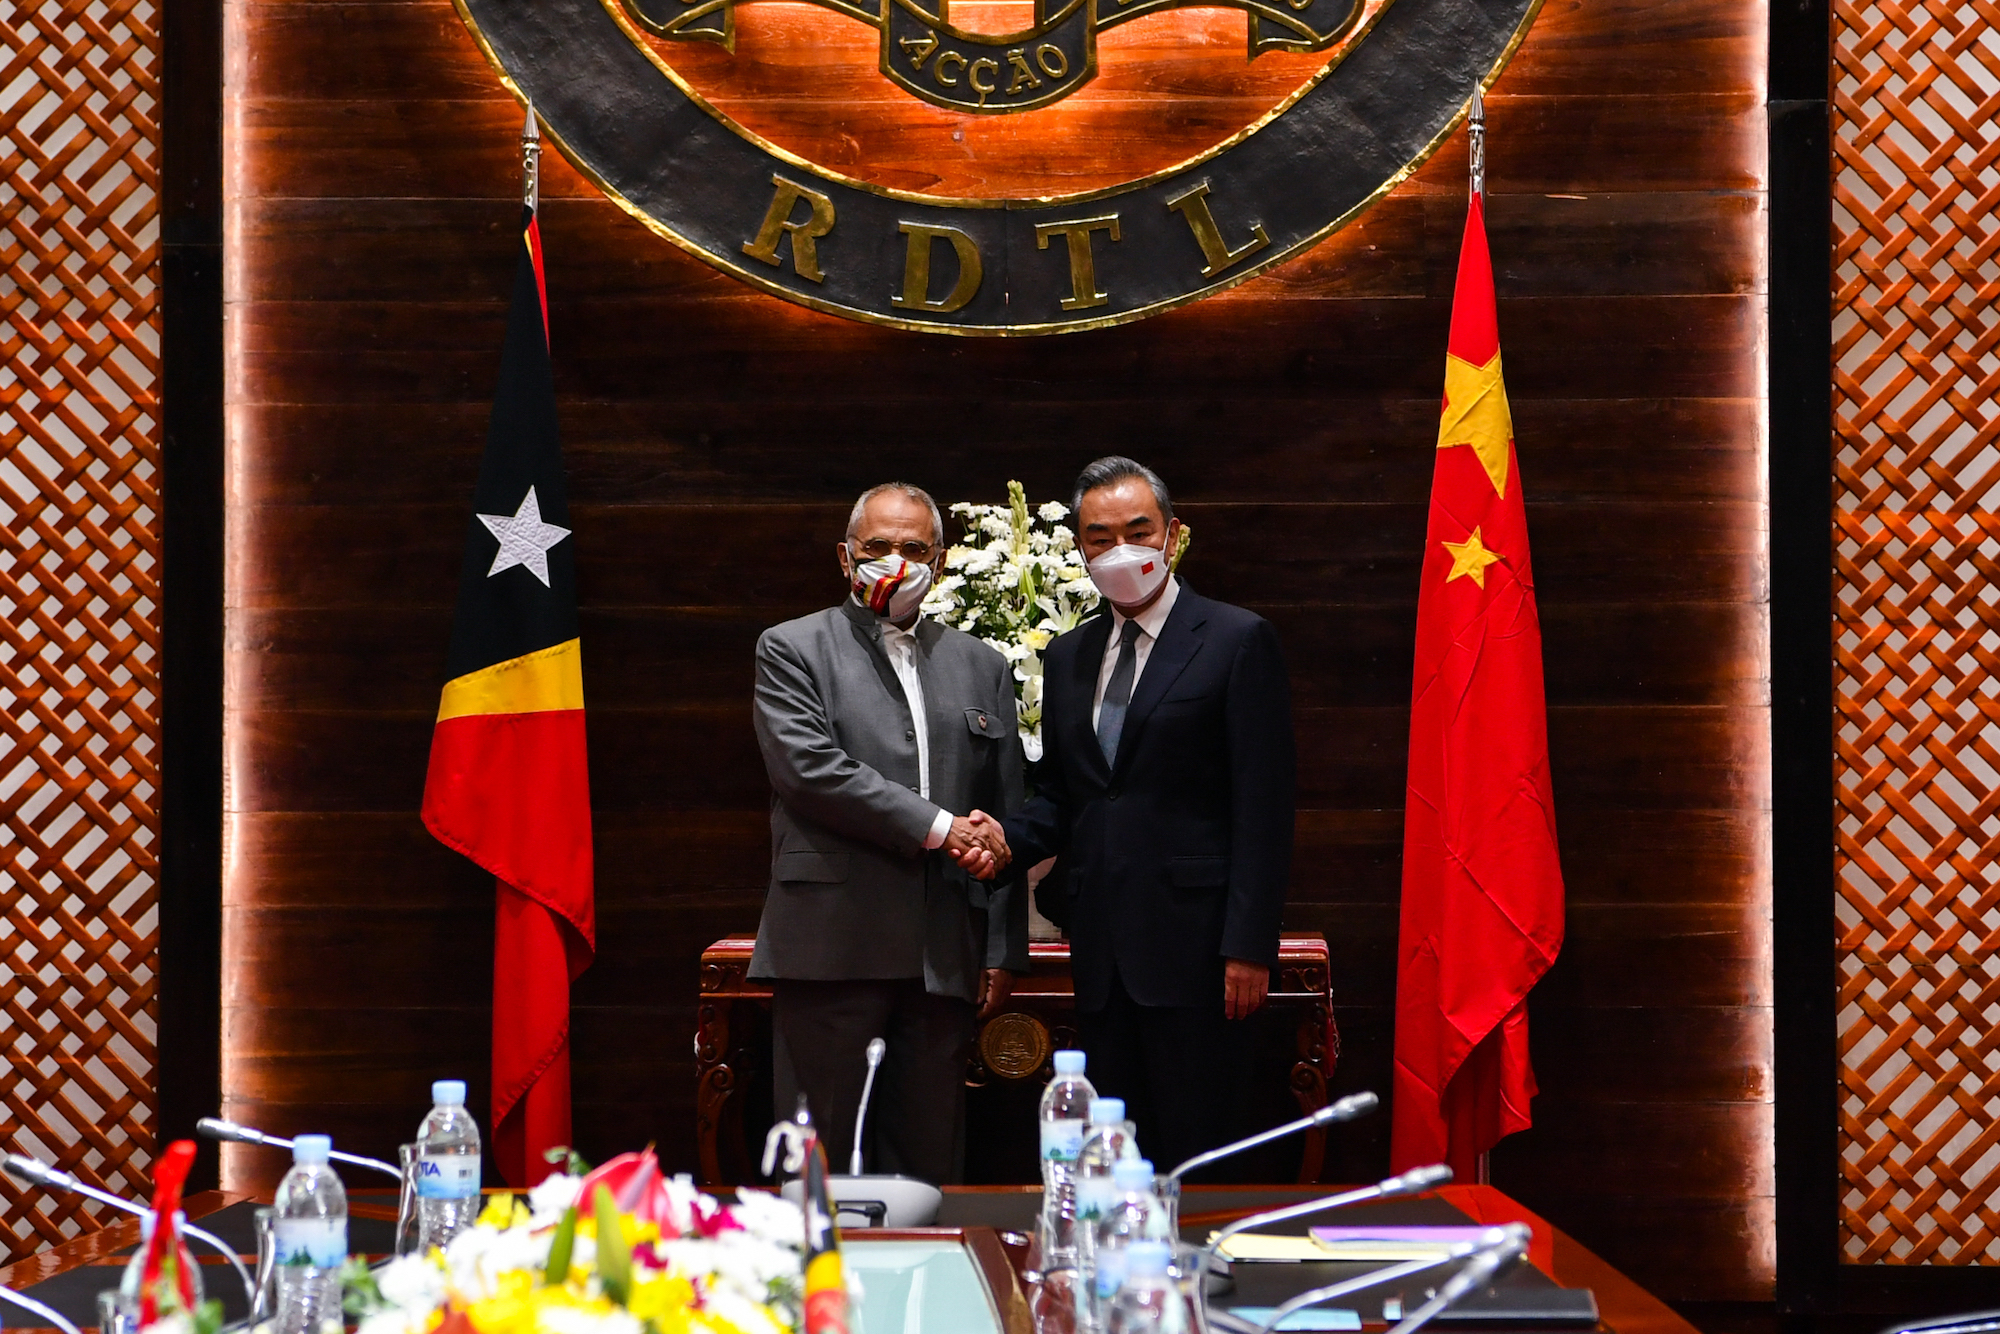 China and Timor-Leste agree to strengthen regional cooperation, safeguard multilateralism